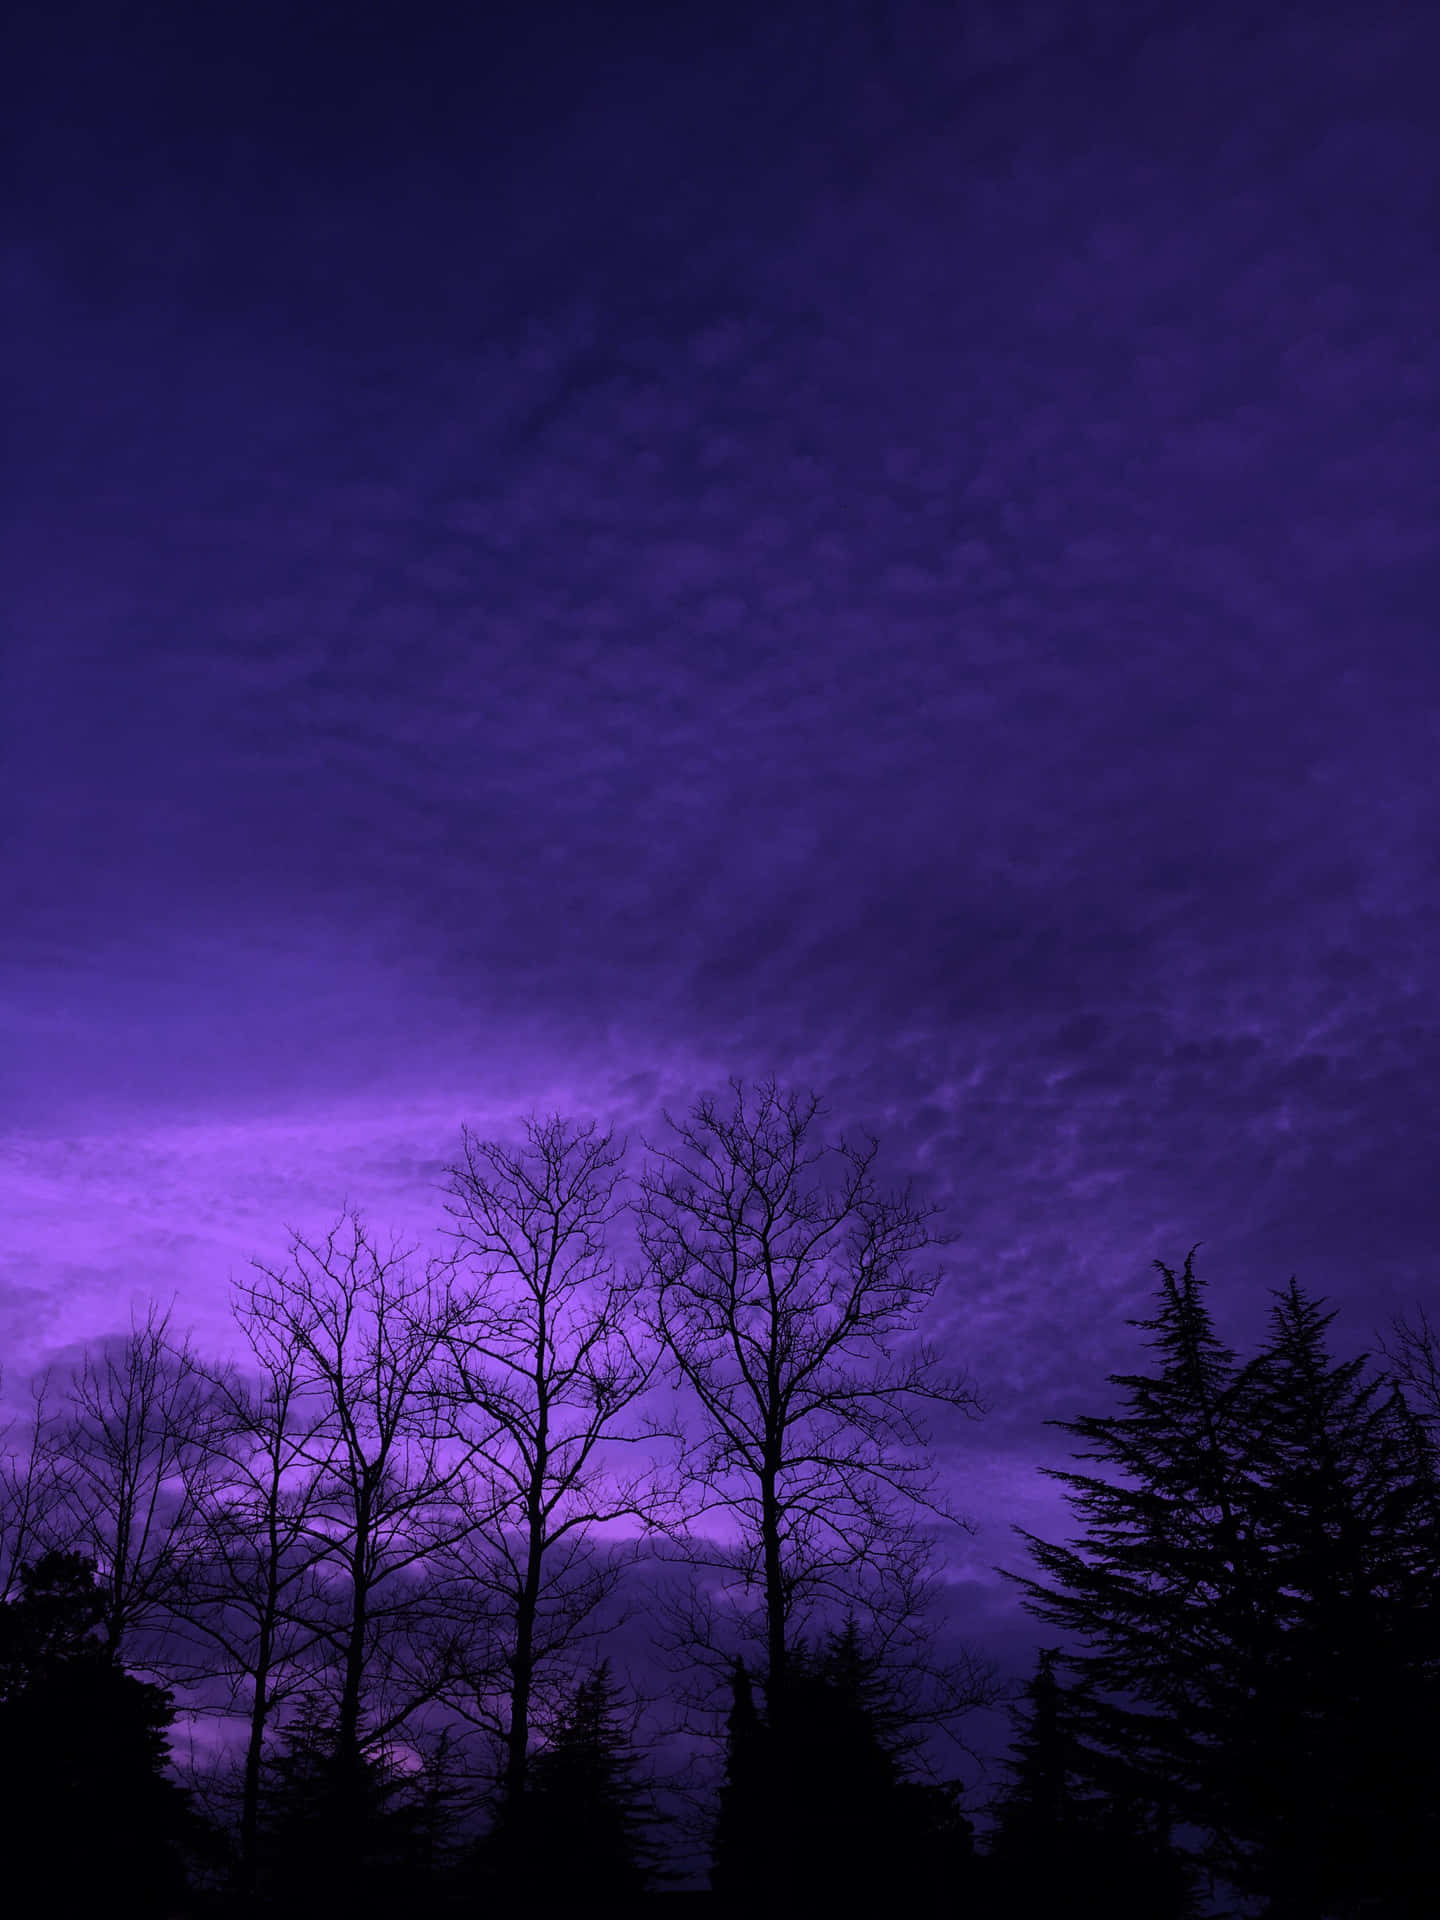 Aesthetic Nature With A Purple Sky Background